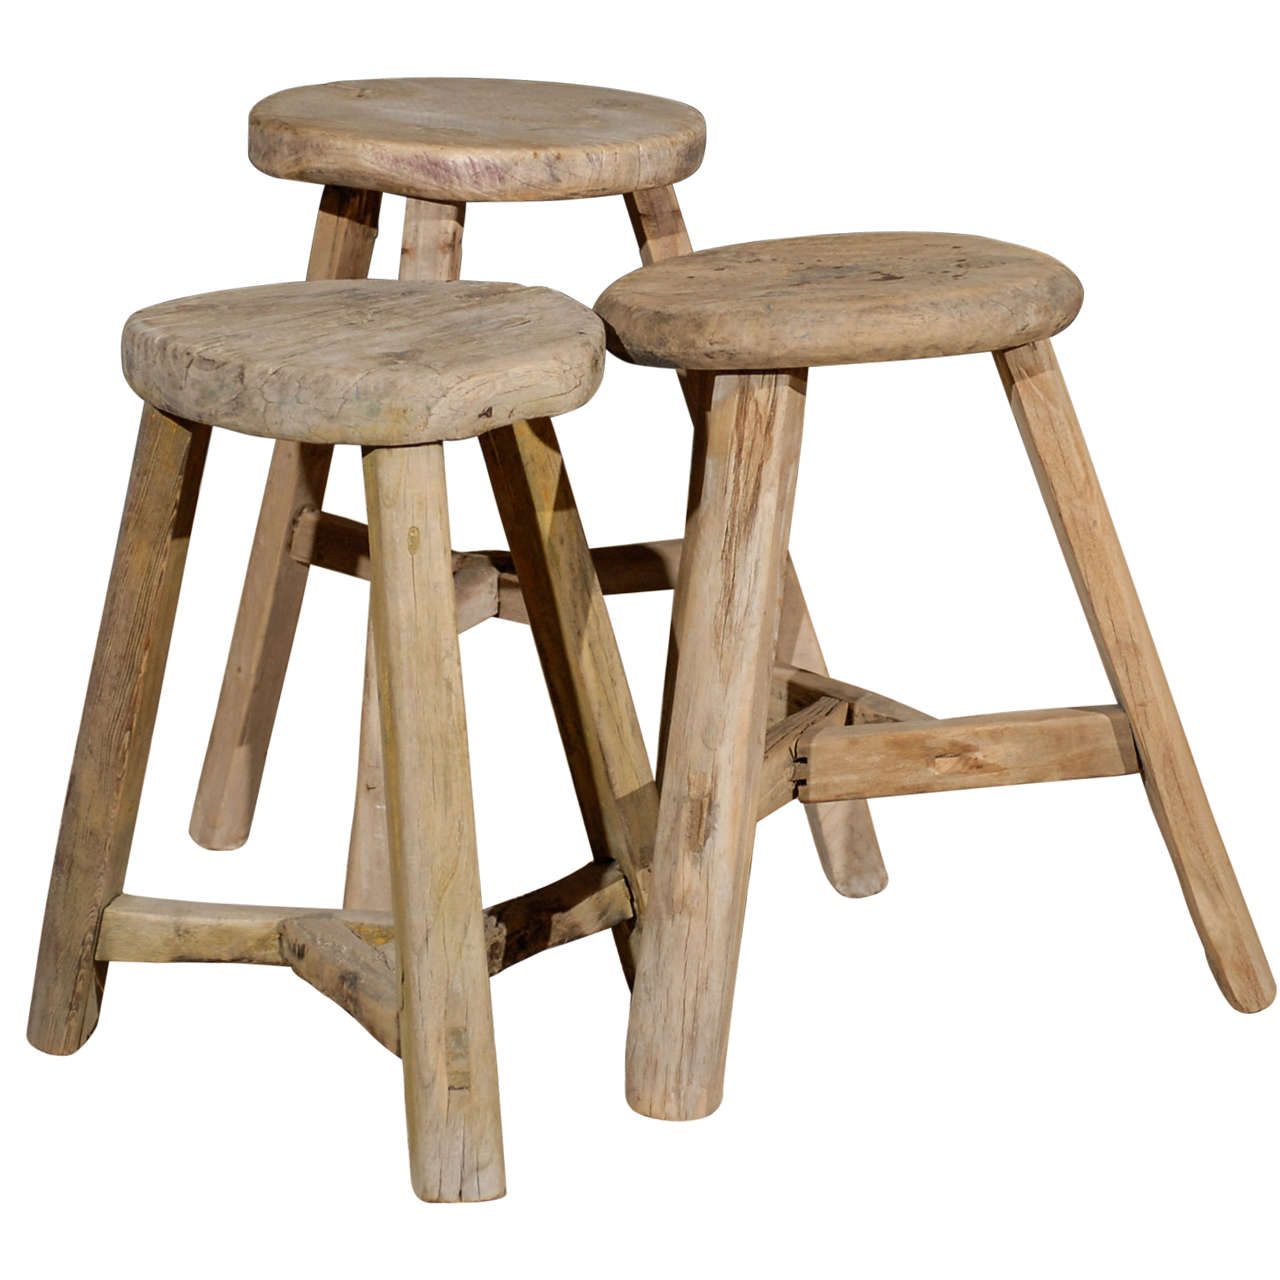 Milking Stools For Sale